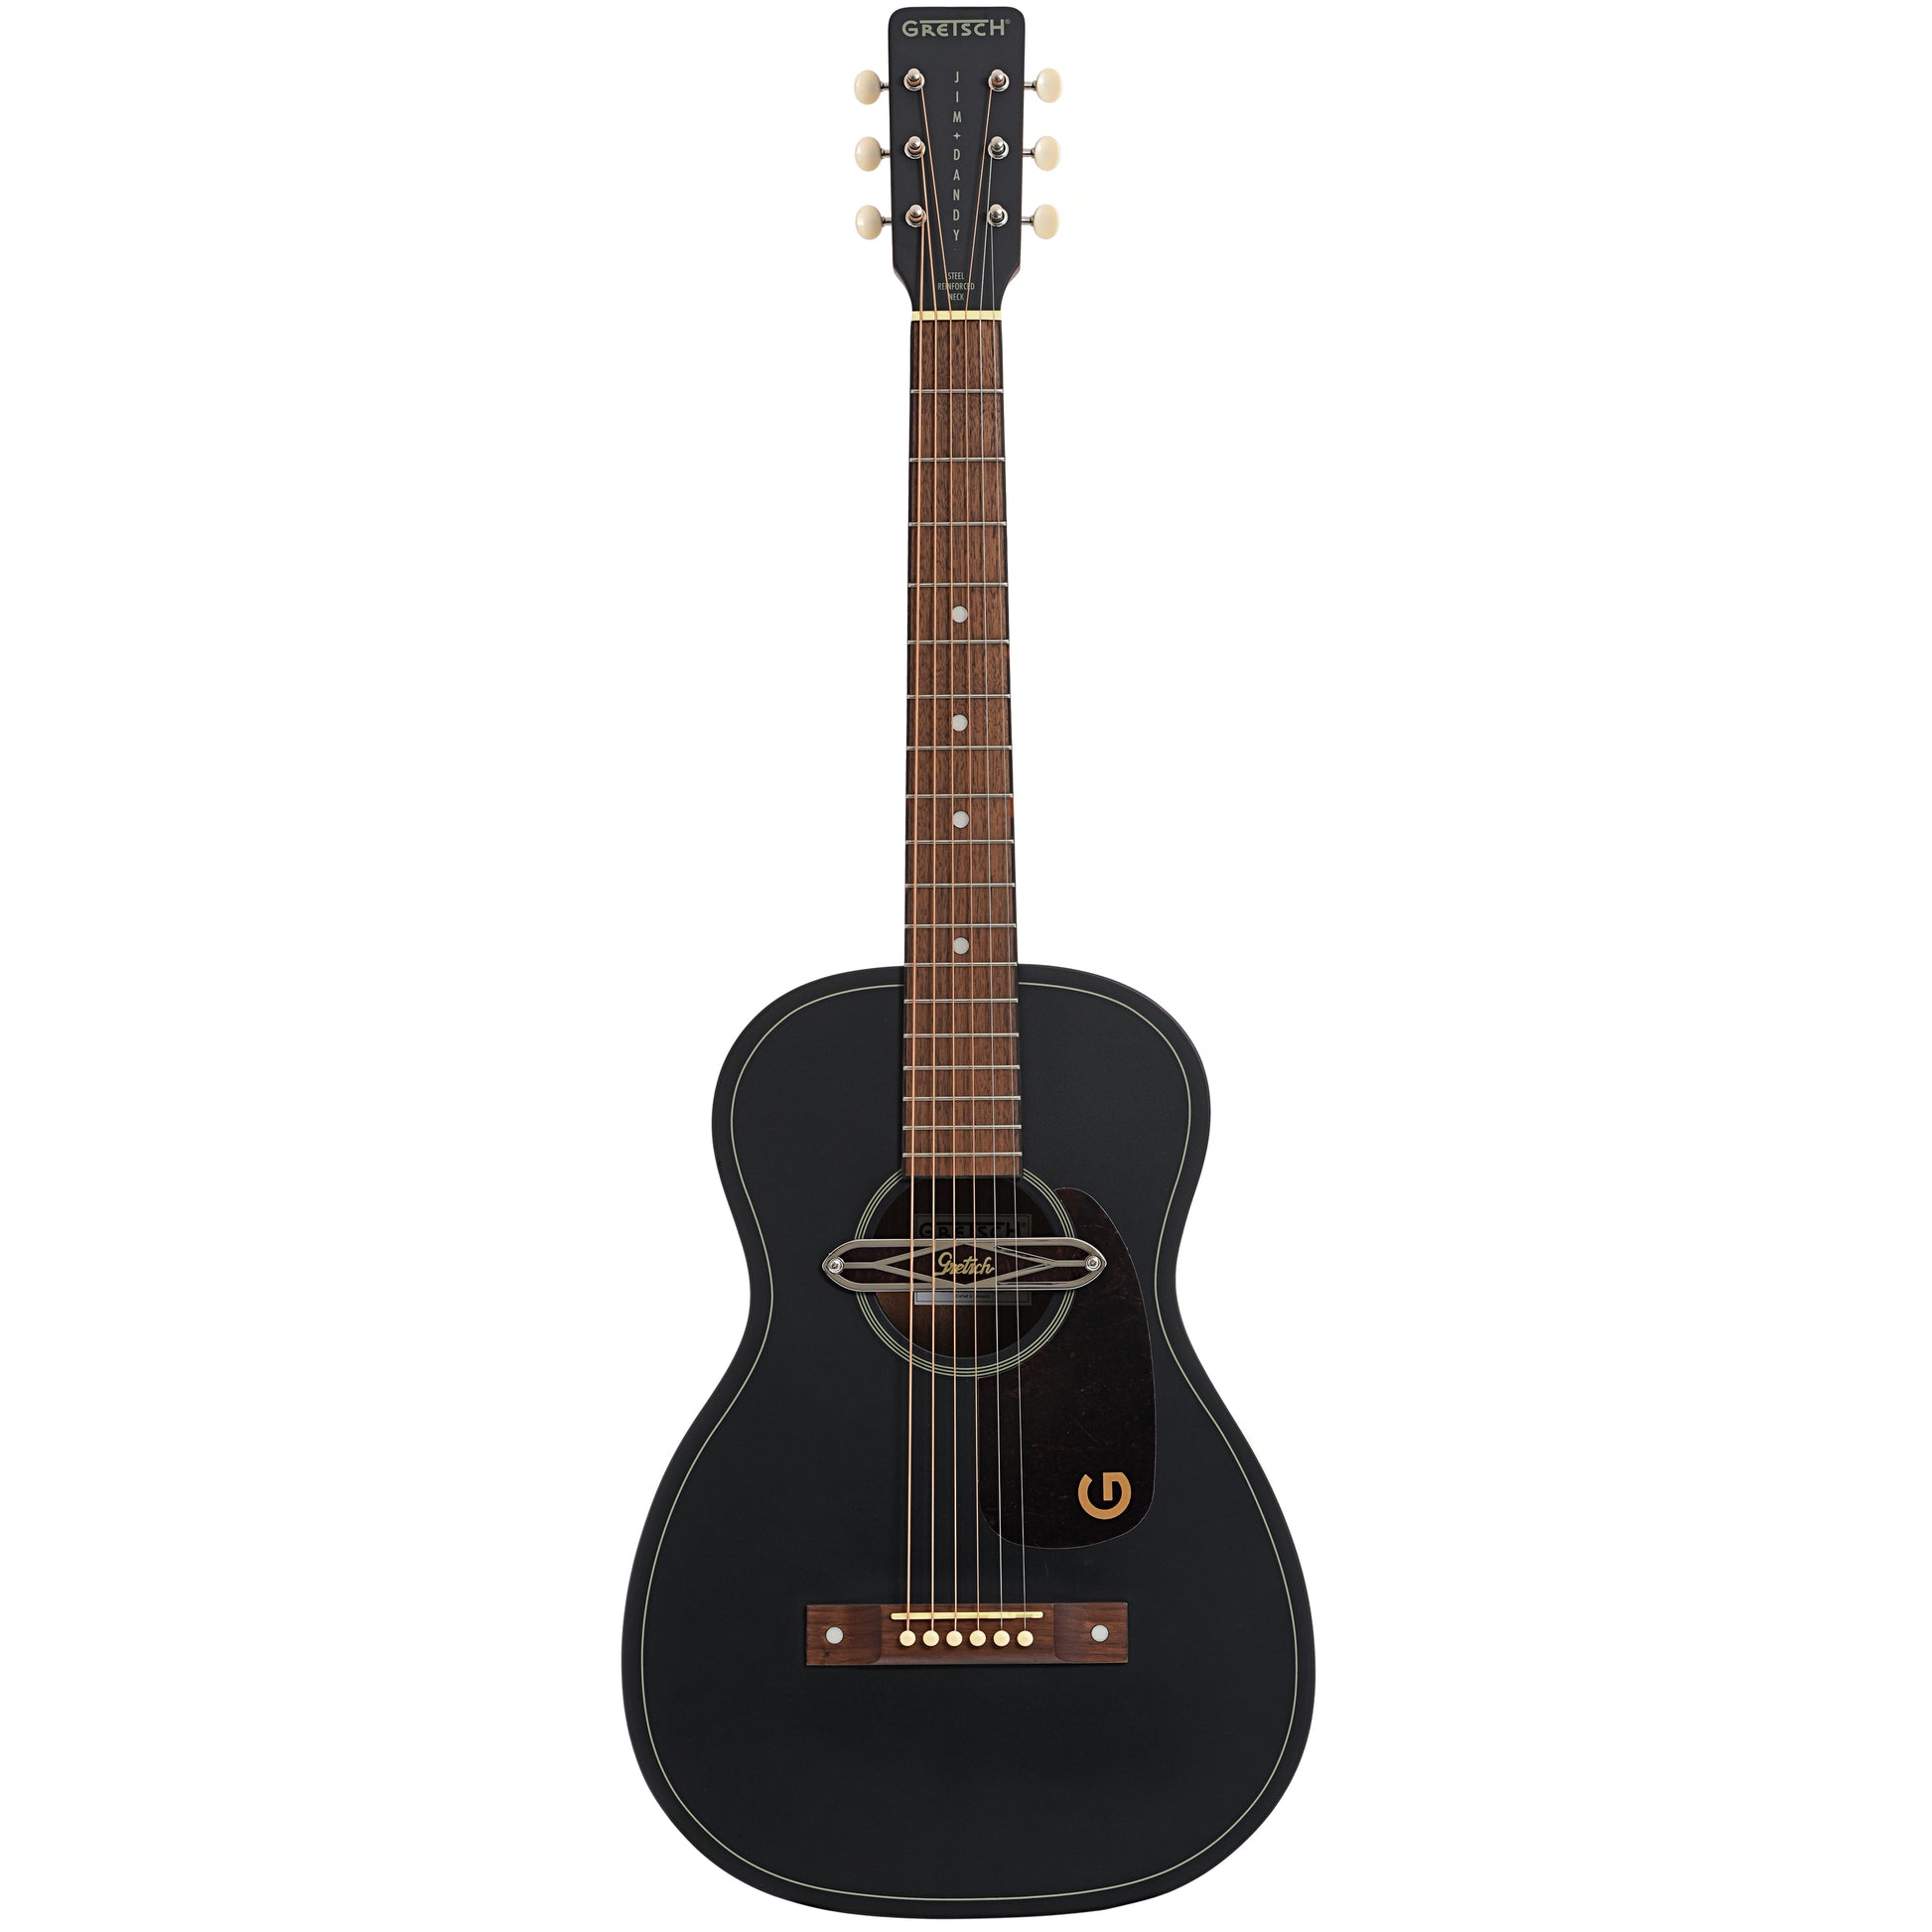 Full front of Gretsch Jim Dandy Deltoluxe Parlor Acoustic/Electric Guitar, Black Top